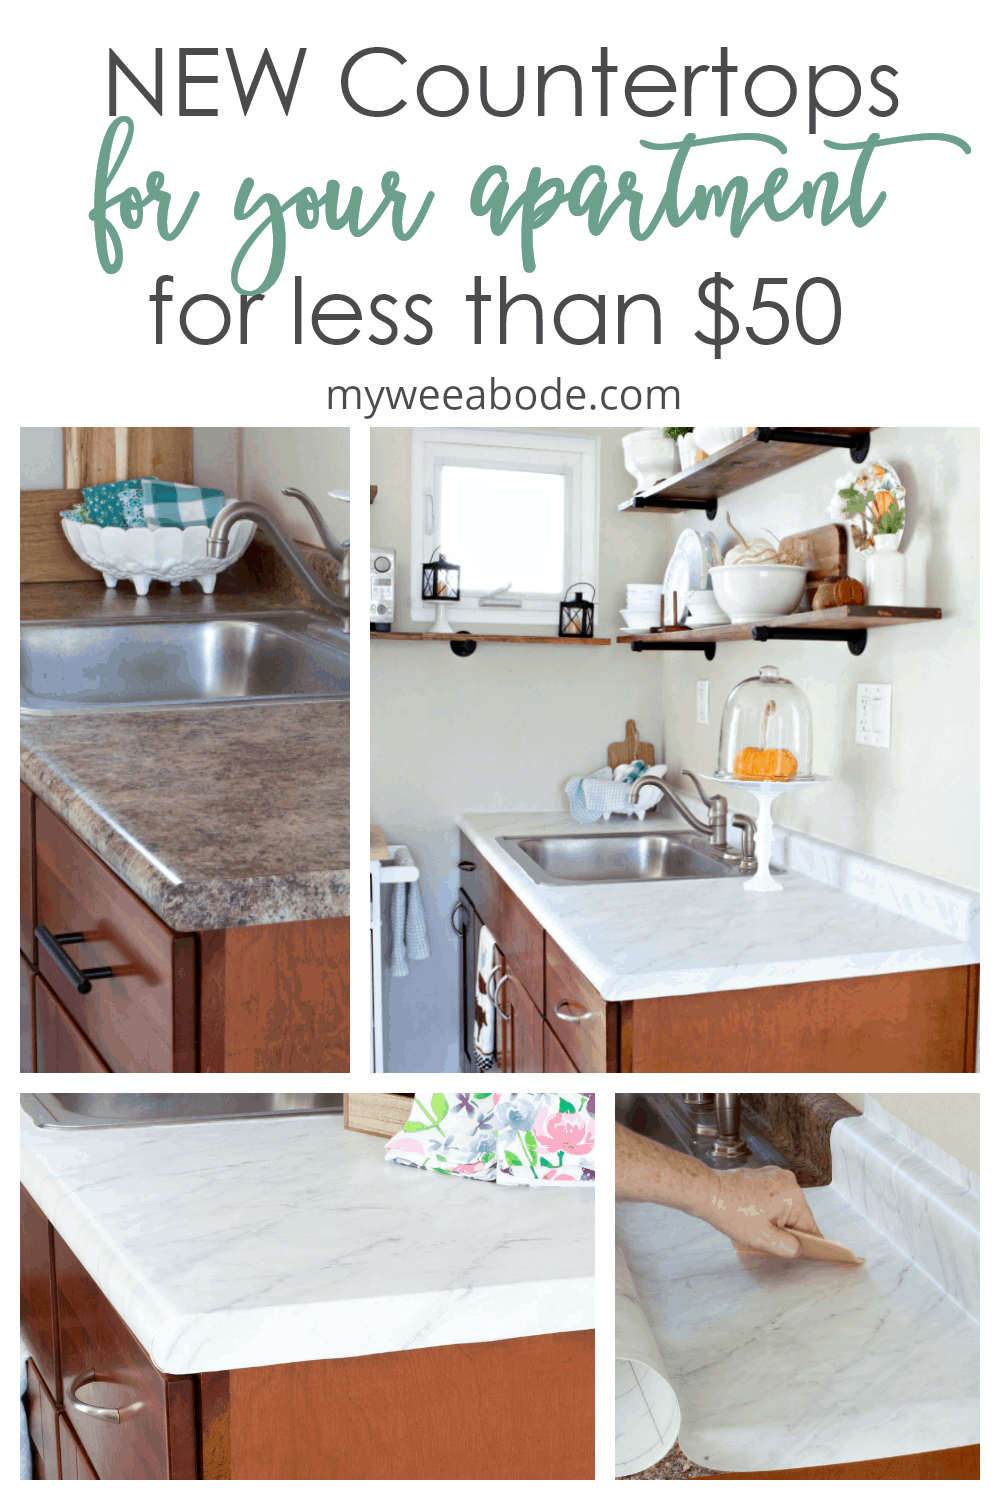 Diy Countertops With Contact Paper, Will Contact Paper Ruin Countertops